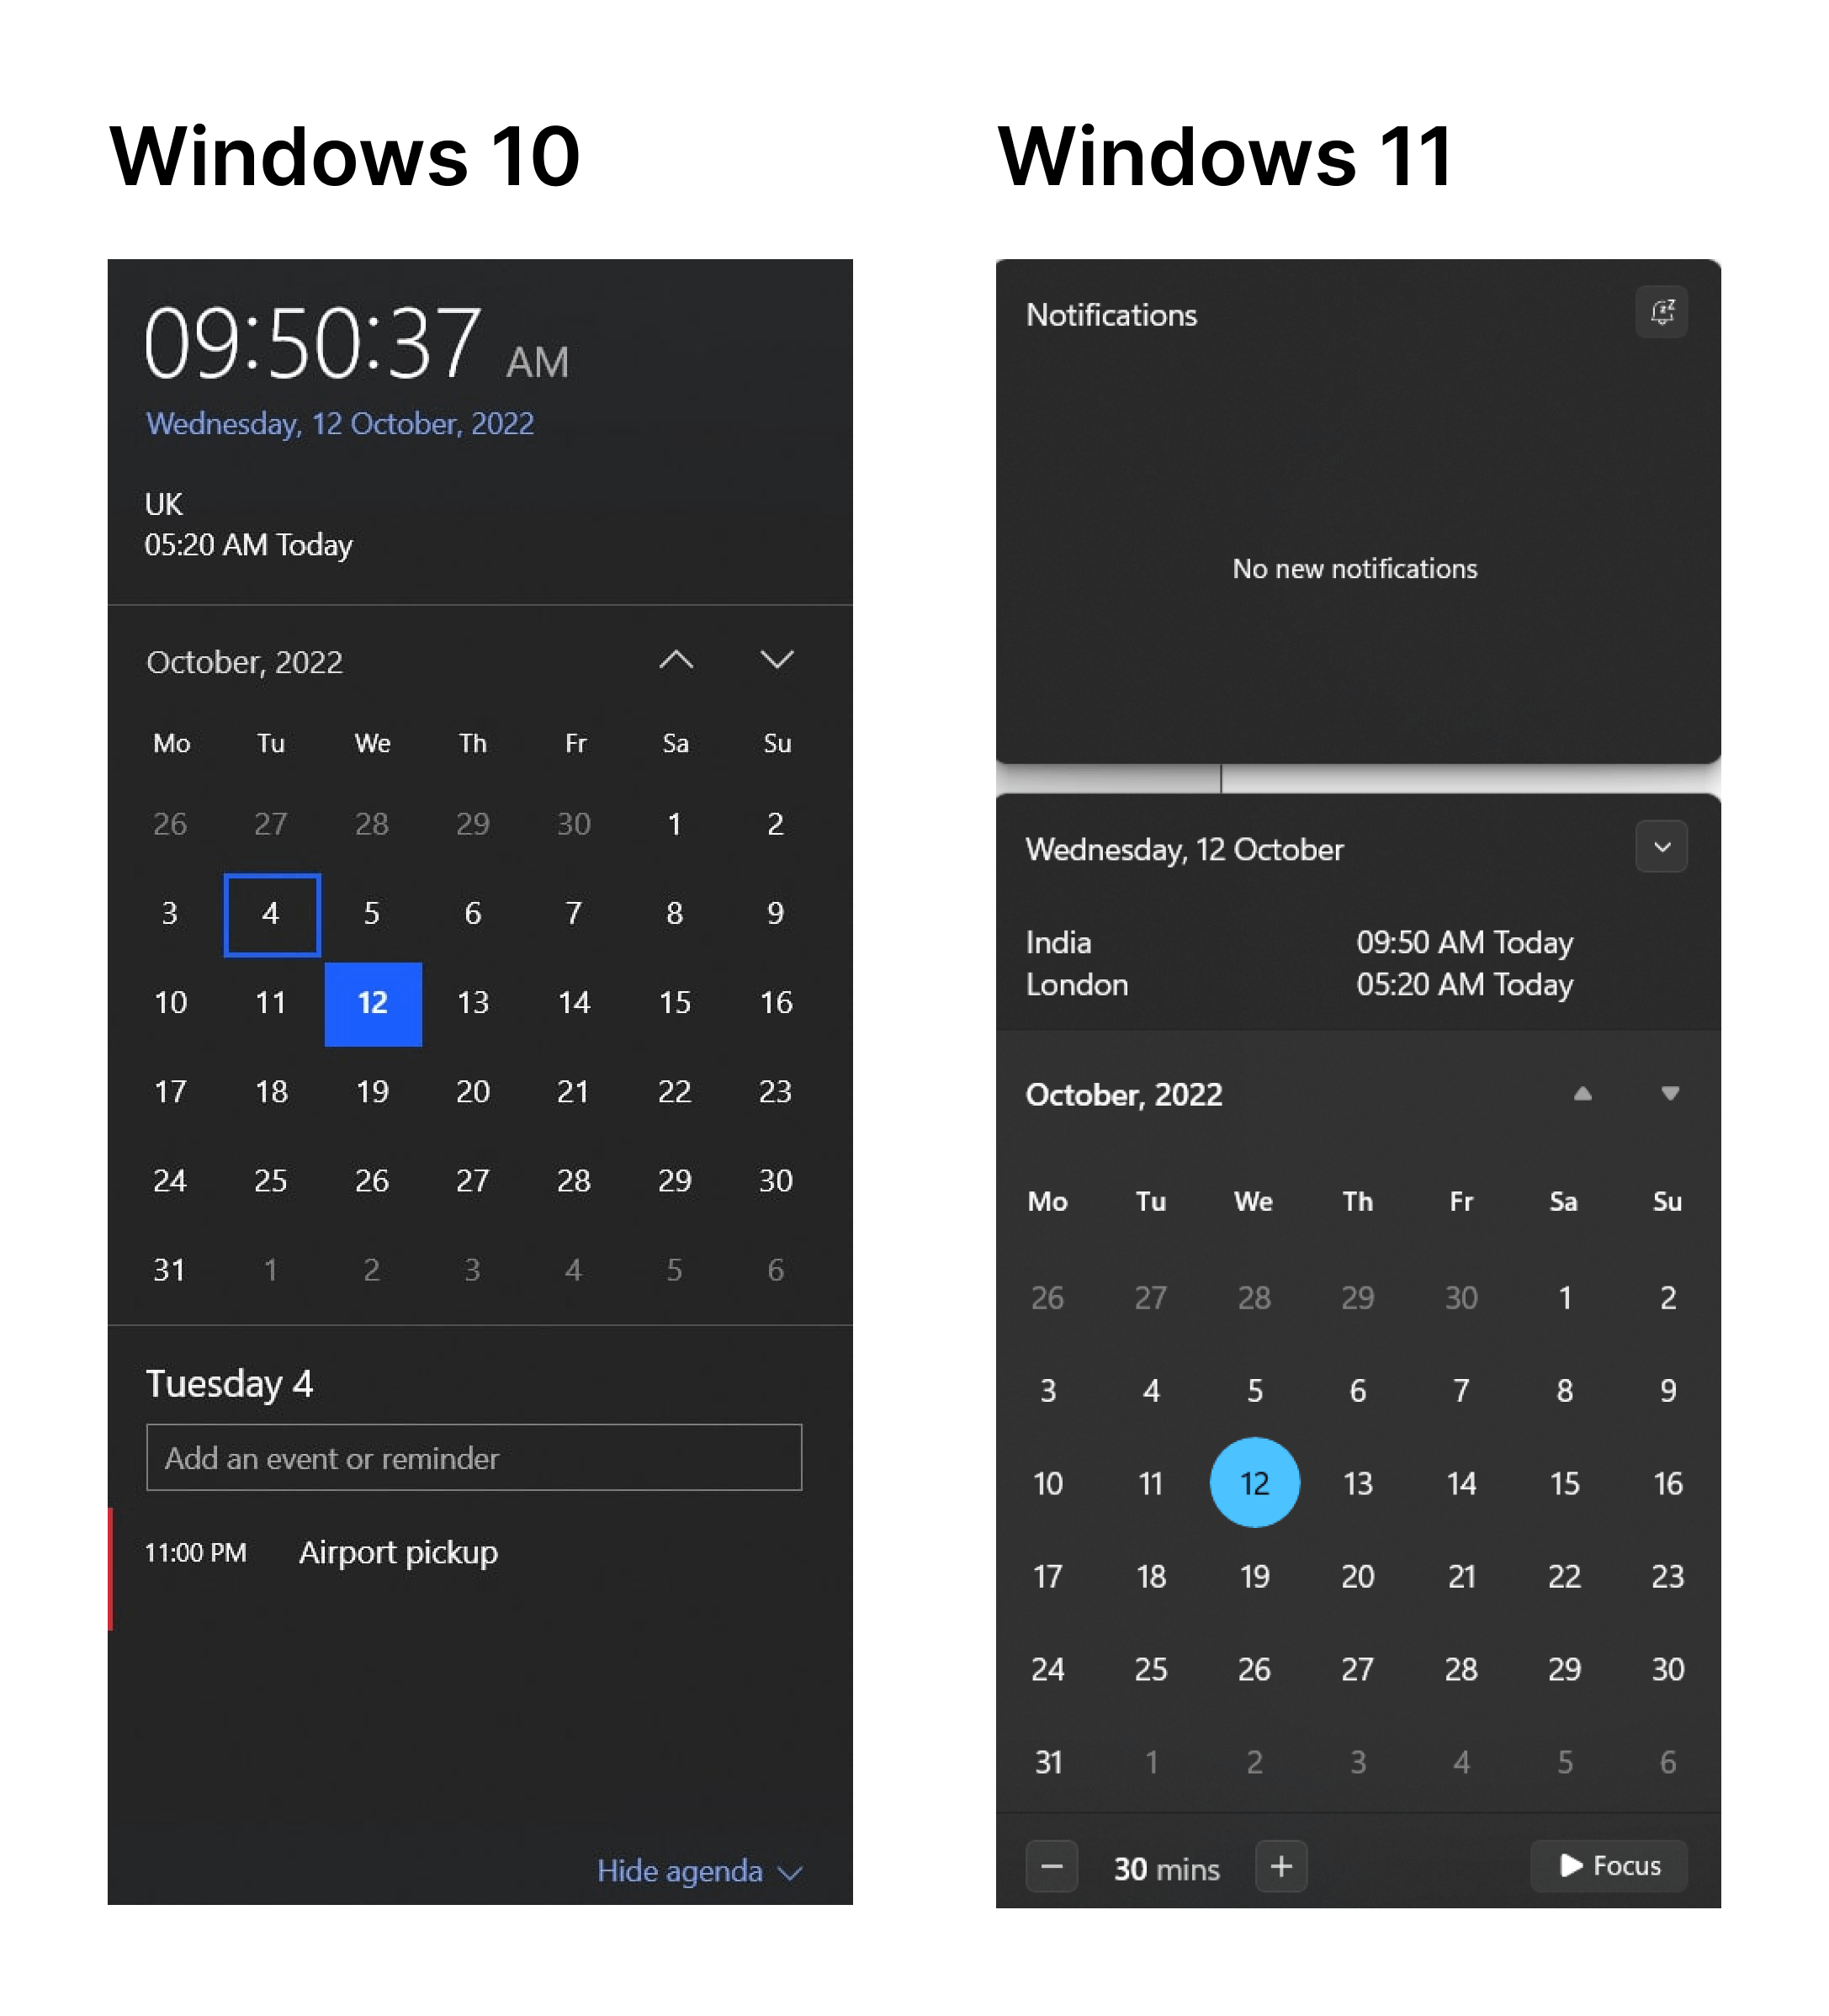 Calendar events are not displayed in Windows 11 Microsoft Community